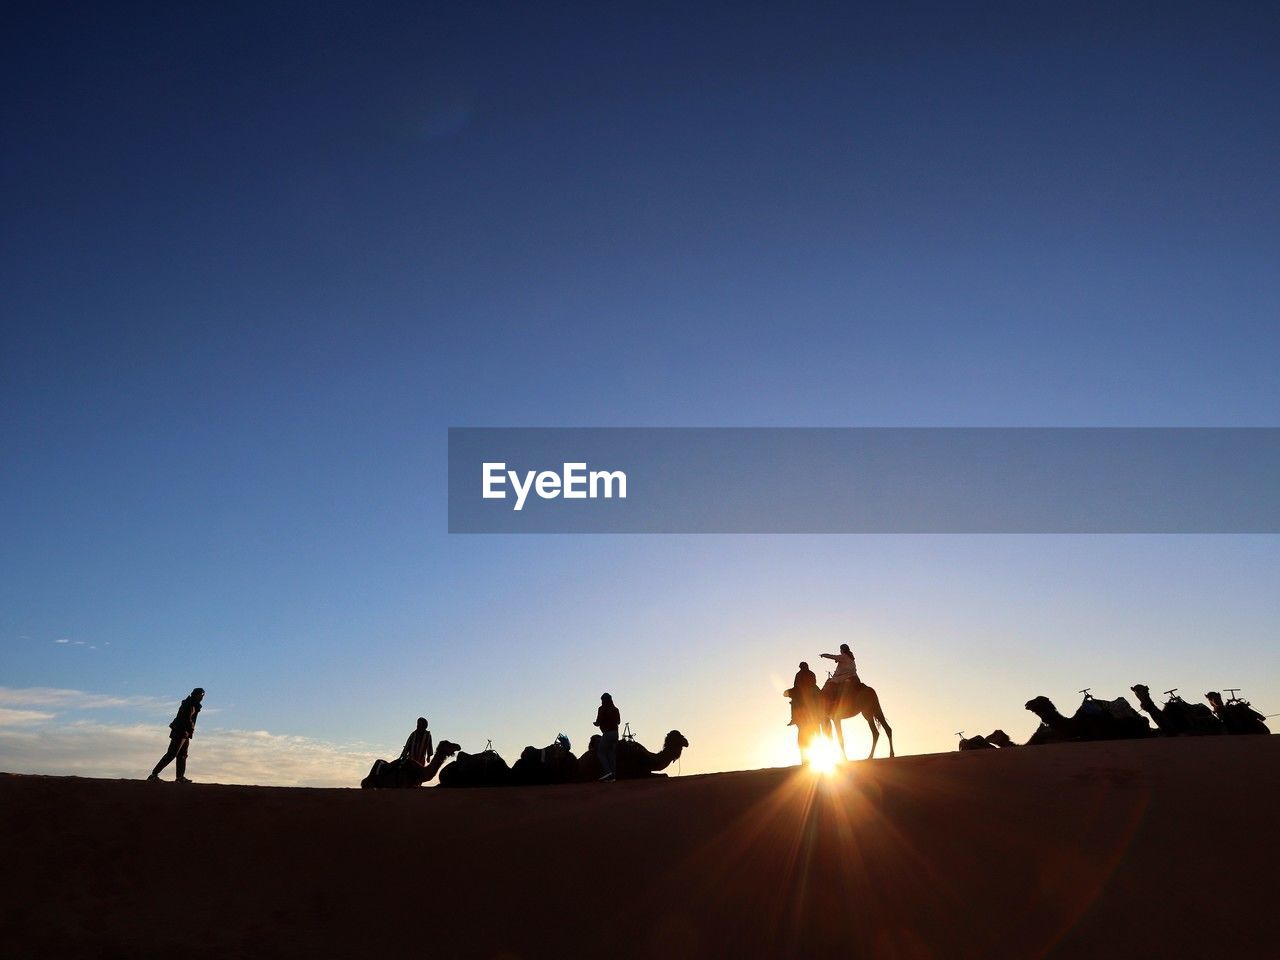 sky, horizon, silhouette, nature, natural environment, group of people, land, camel, desert, mammal, landscape, animal, copy space, animal themes, sunlight, blue, adult, clear sky, domestic animals, sunset, men, travel, scenics - nature, environment, group of animals, sun, beauty in nature, walking, leisure activity, animal wildlife, sand, outdoors, sand dune, travel destinations, activity, erg, group, motion, riding, lifestyles, dusk, medium group of people, adventure, working animal, togetherness